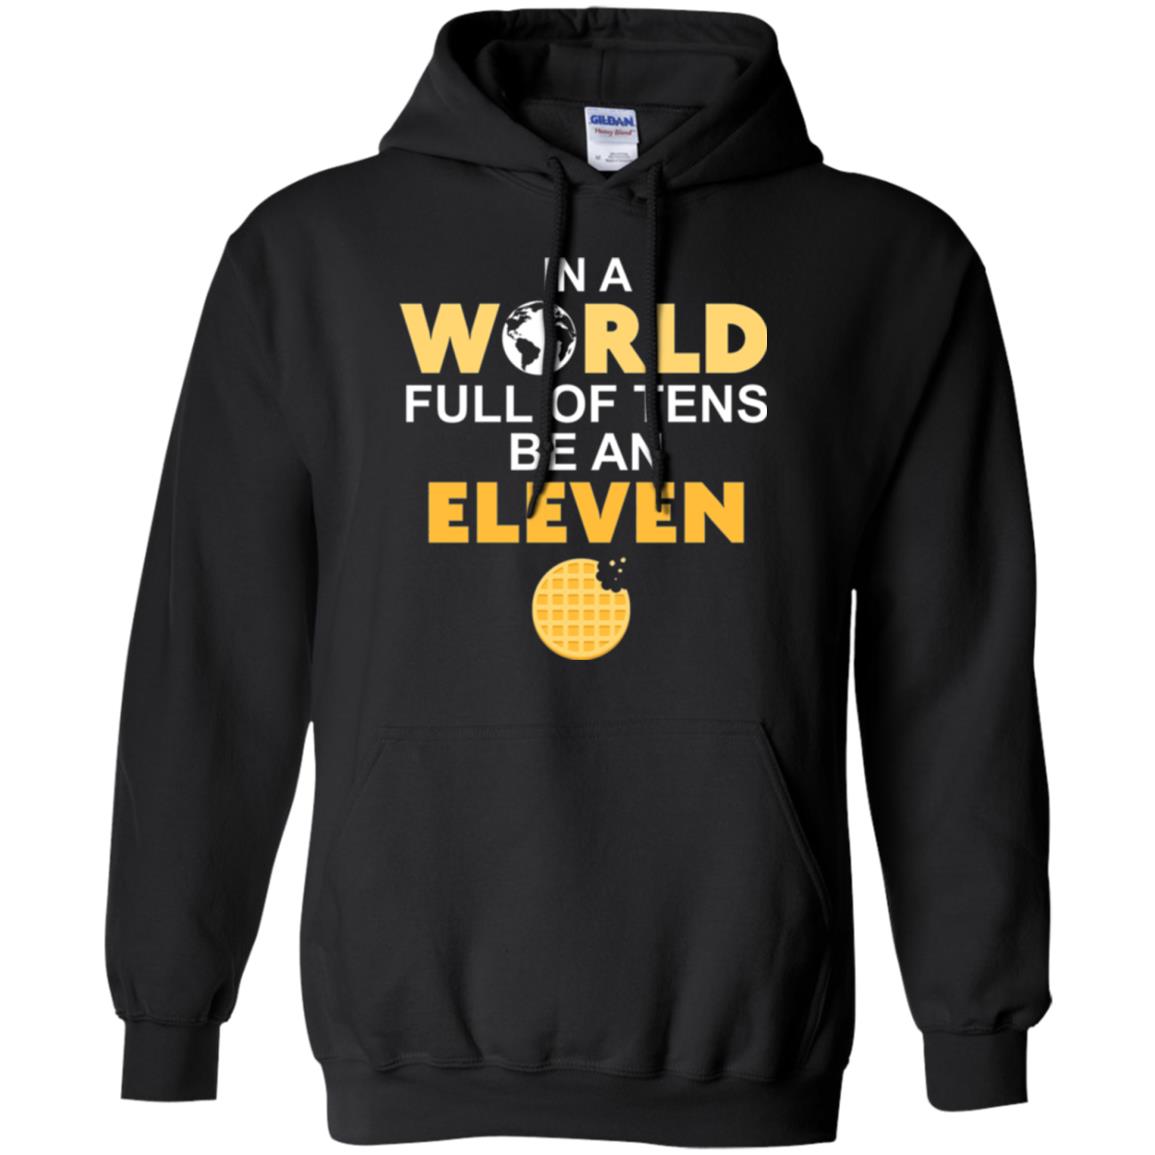 Waffle T-shirt In A World Full Of Tens Be An Eleven